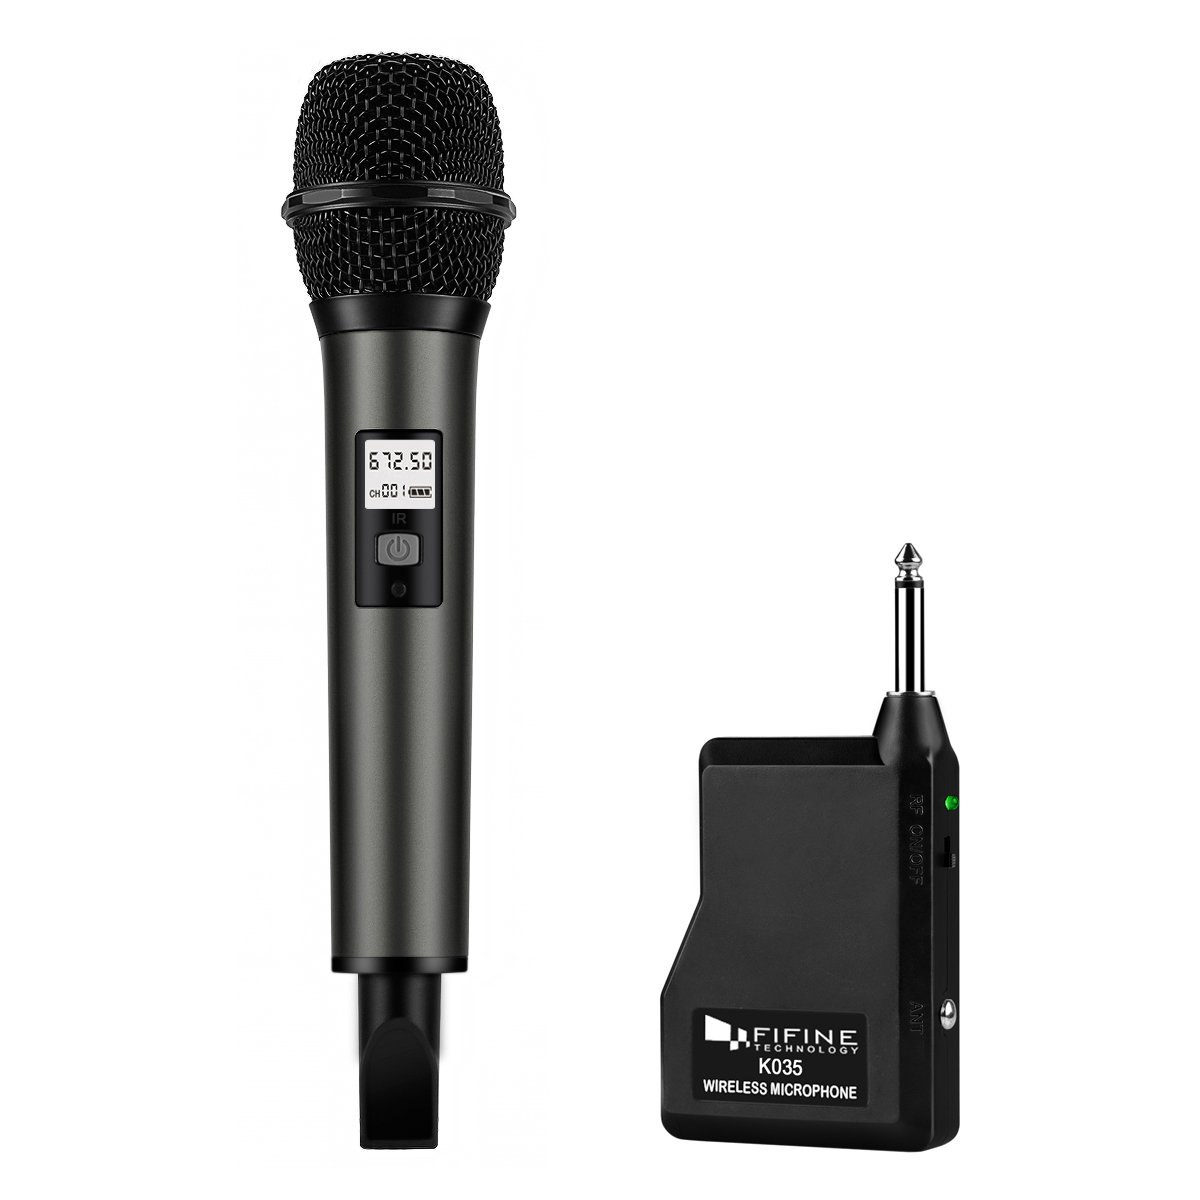 Wireless Microphone Industry Global Market Growth, Trends and Strategy Analysis Report